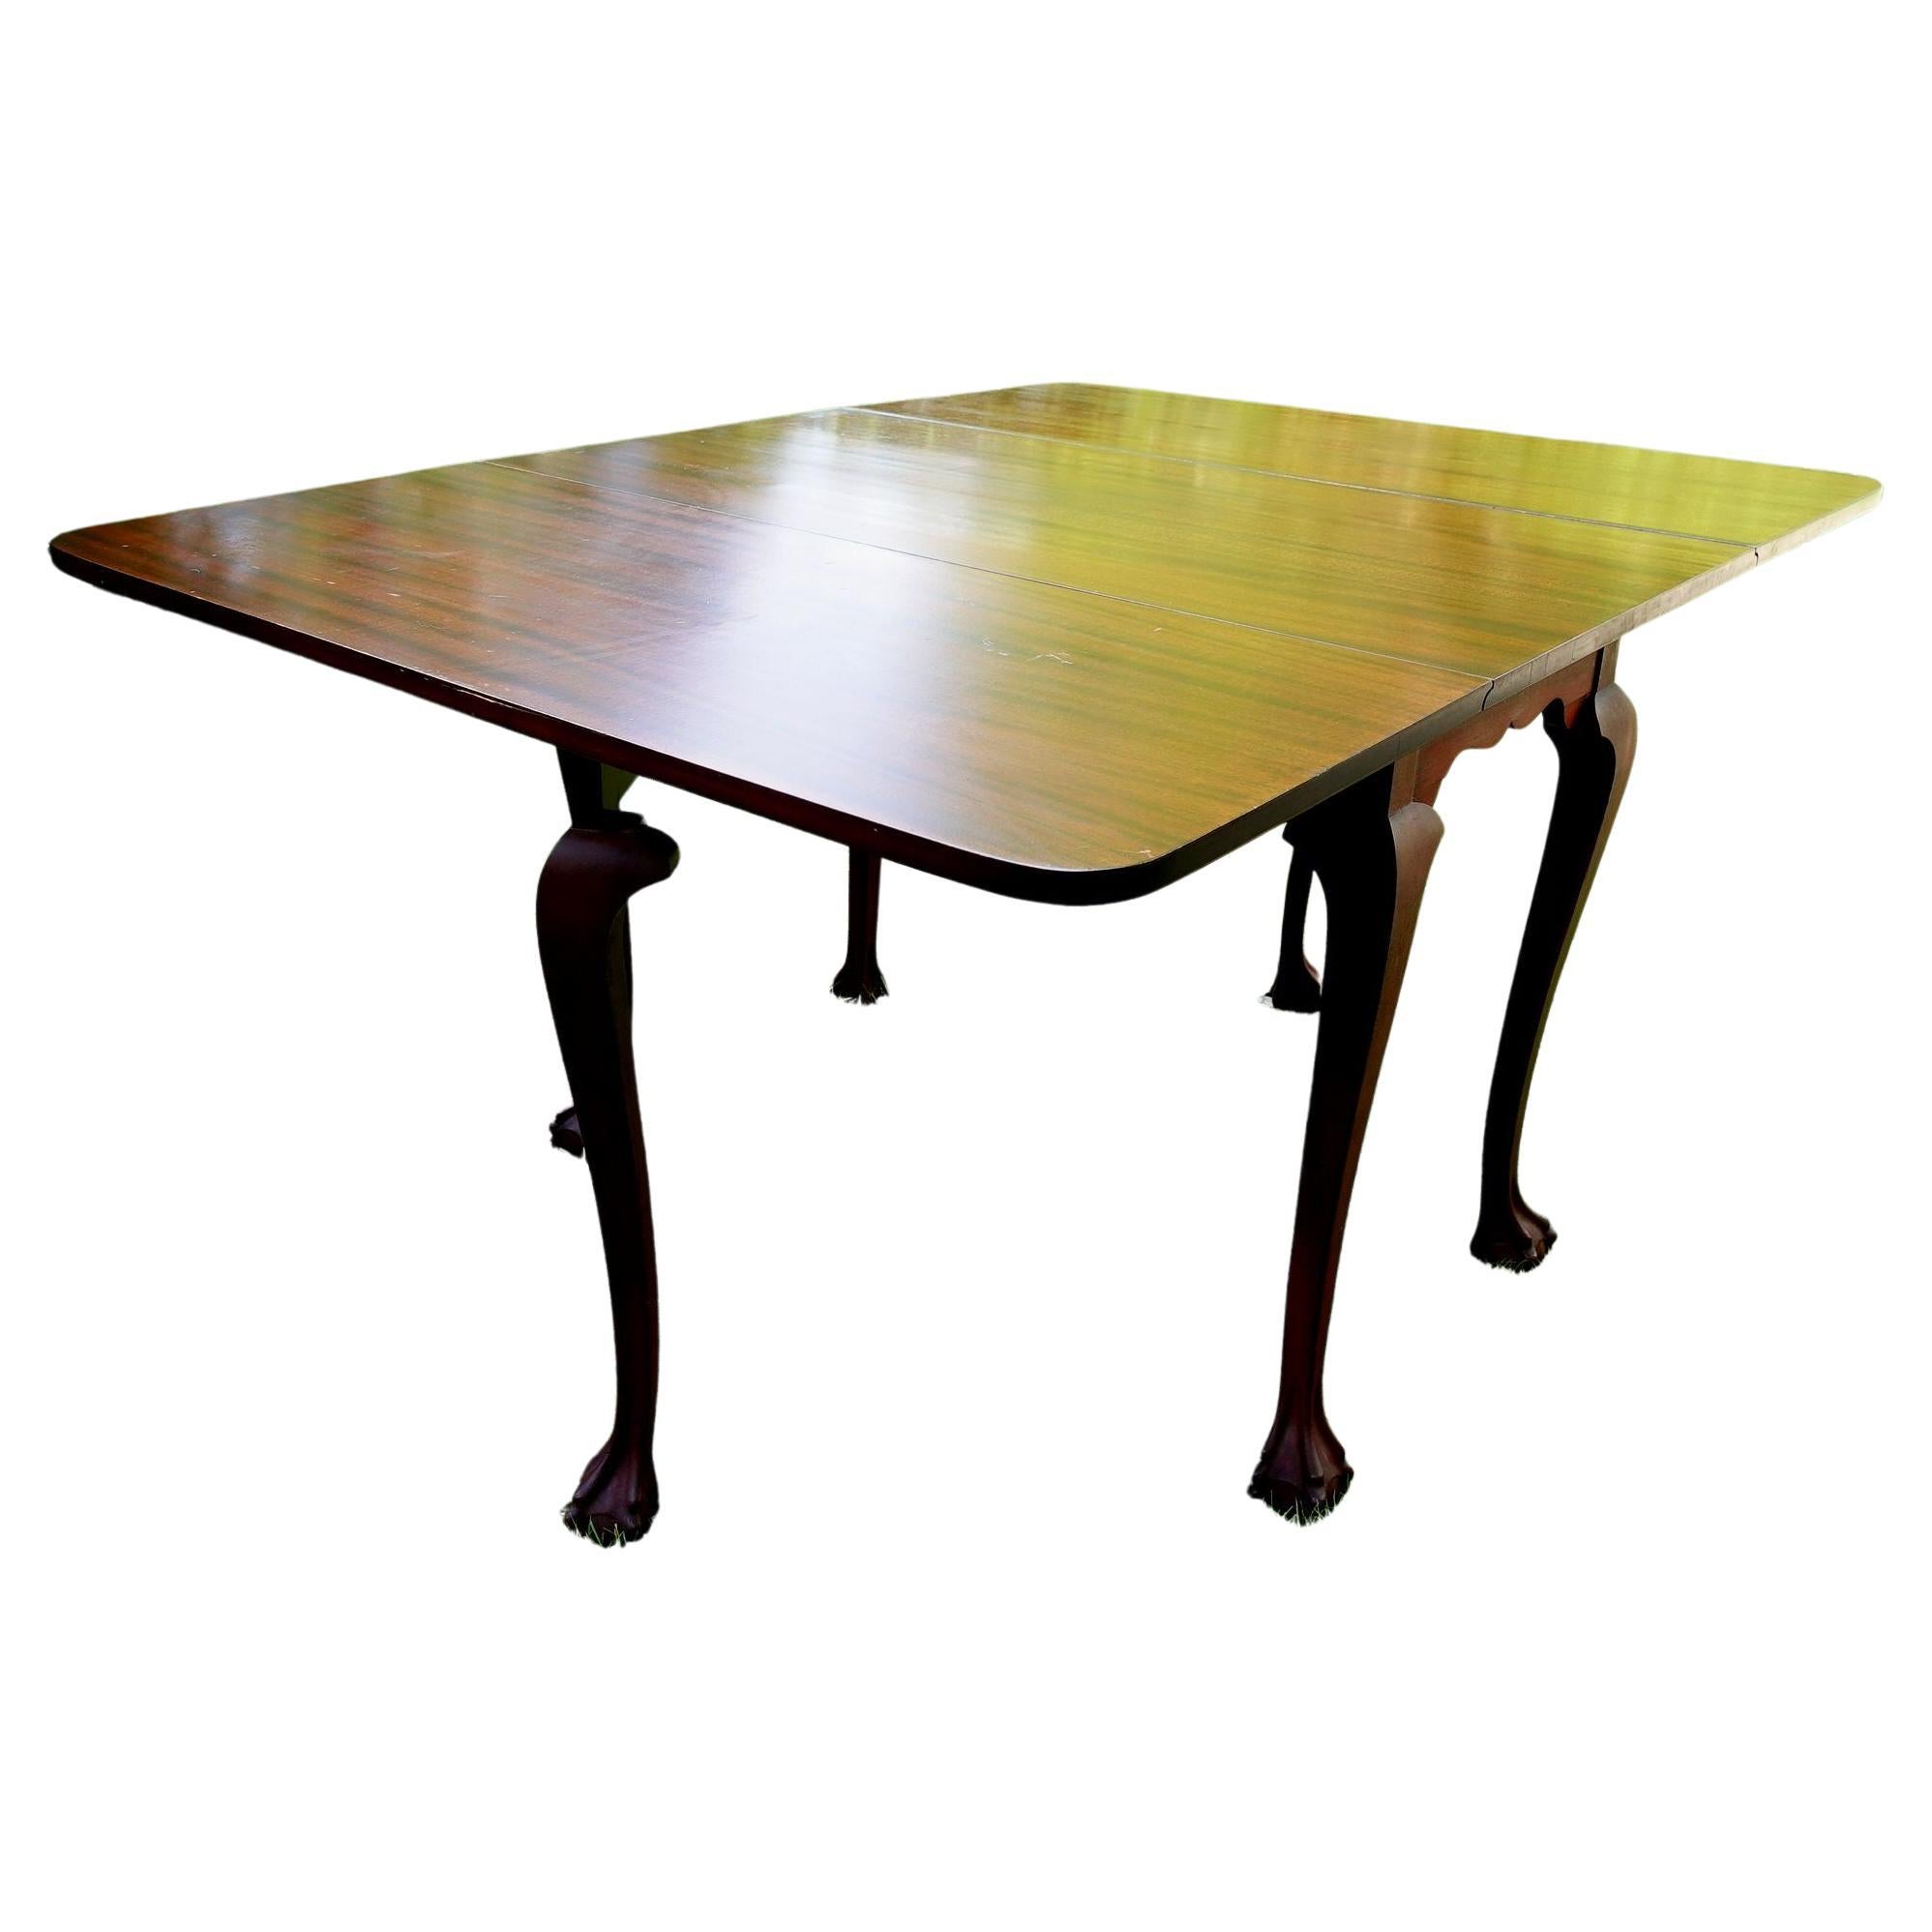 Chippendale Six Leg Claw and Ball Drop-Leaf Dining Table #2 For Sale